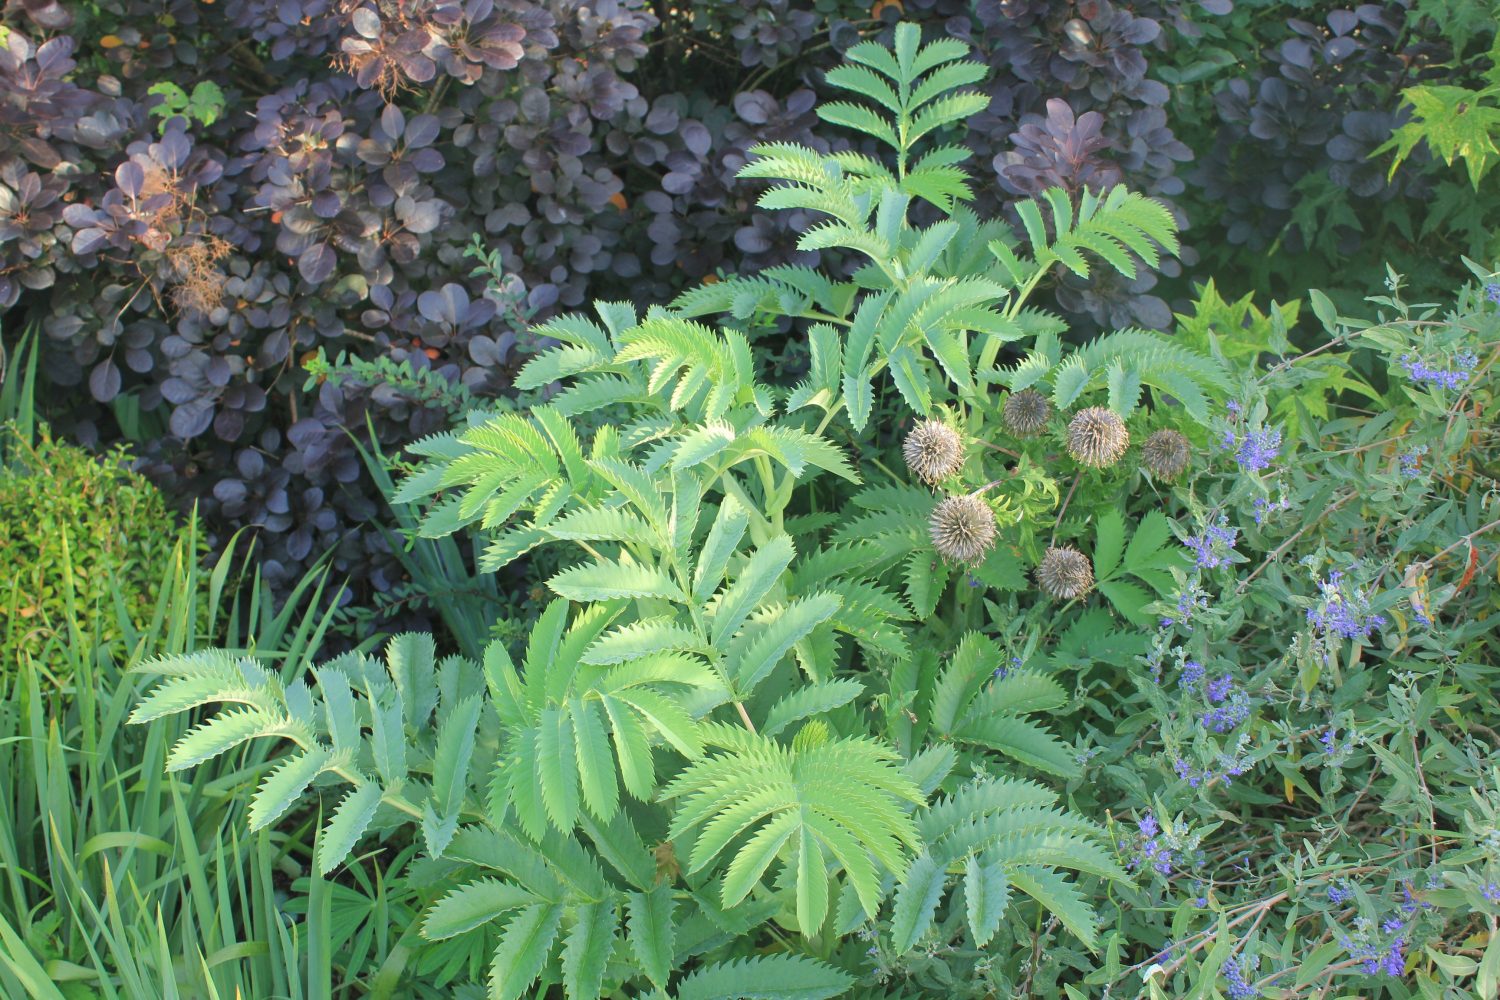 Melianthus major is a surprisingly hardy exotic architectural anchor plant